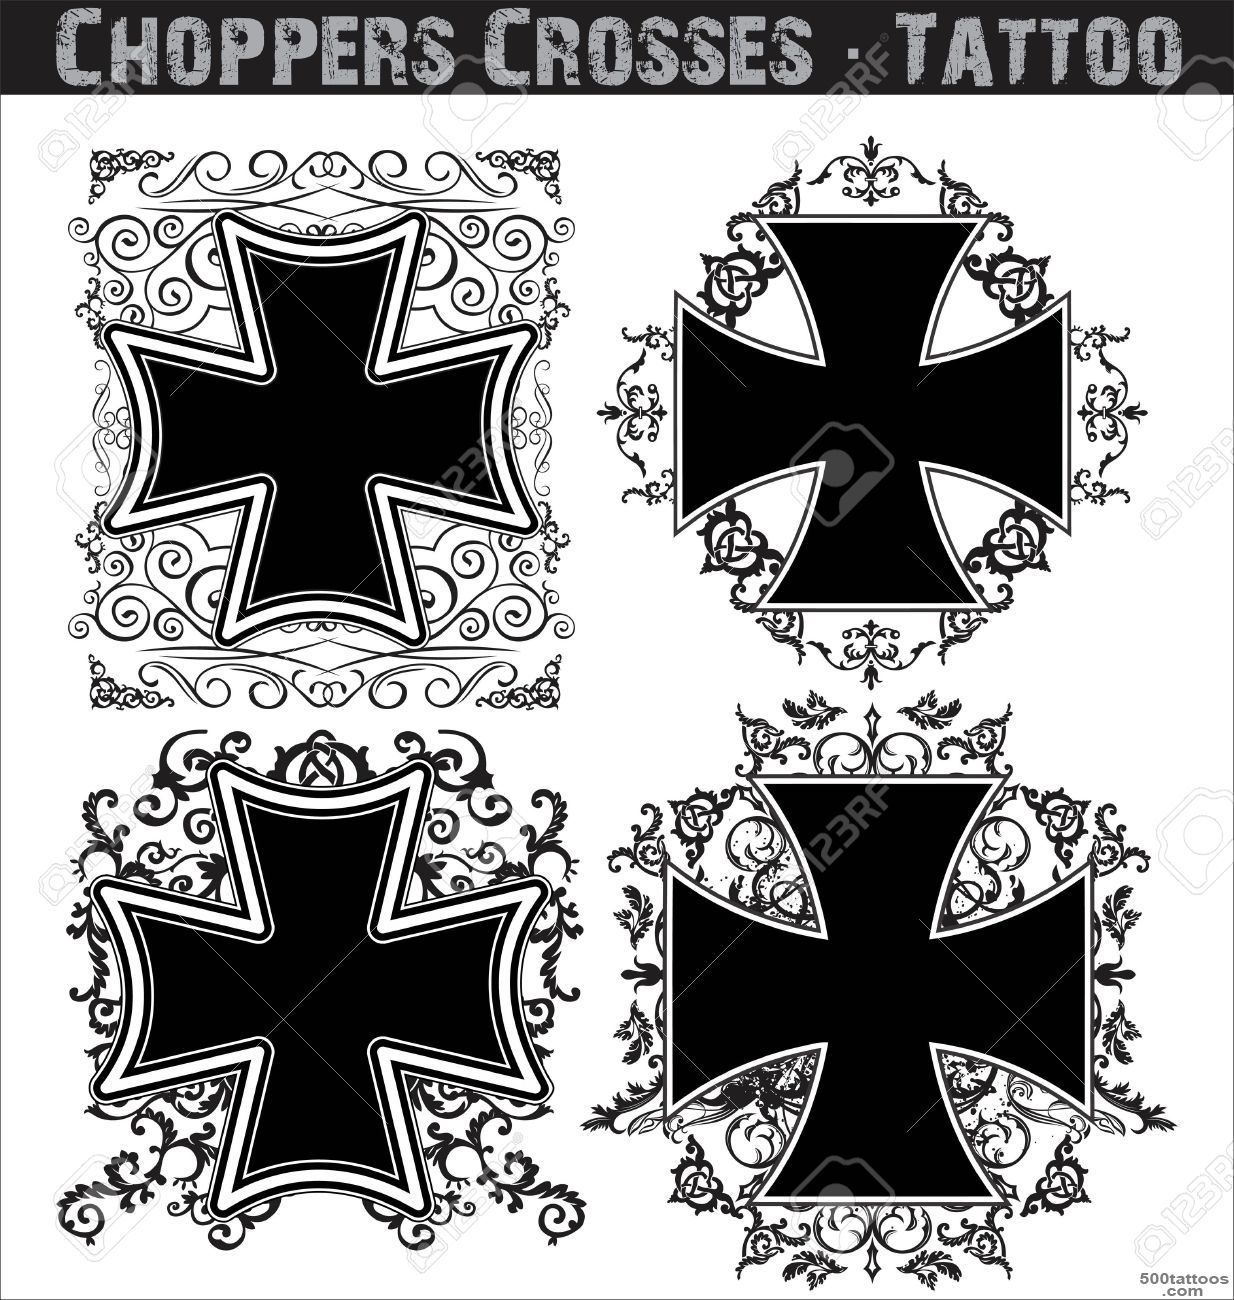 Choppers-Crosses-Tattoo-Royalty-Free-Cliparts,-Vectors,-And-Stock-..._12.jpg